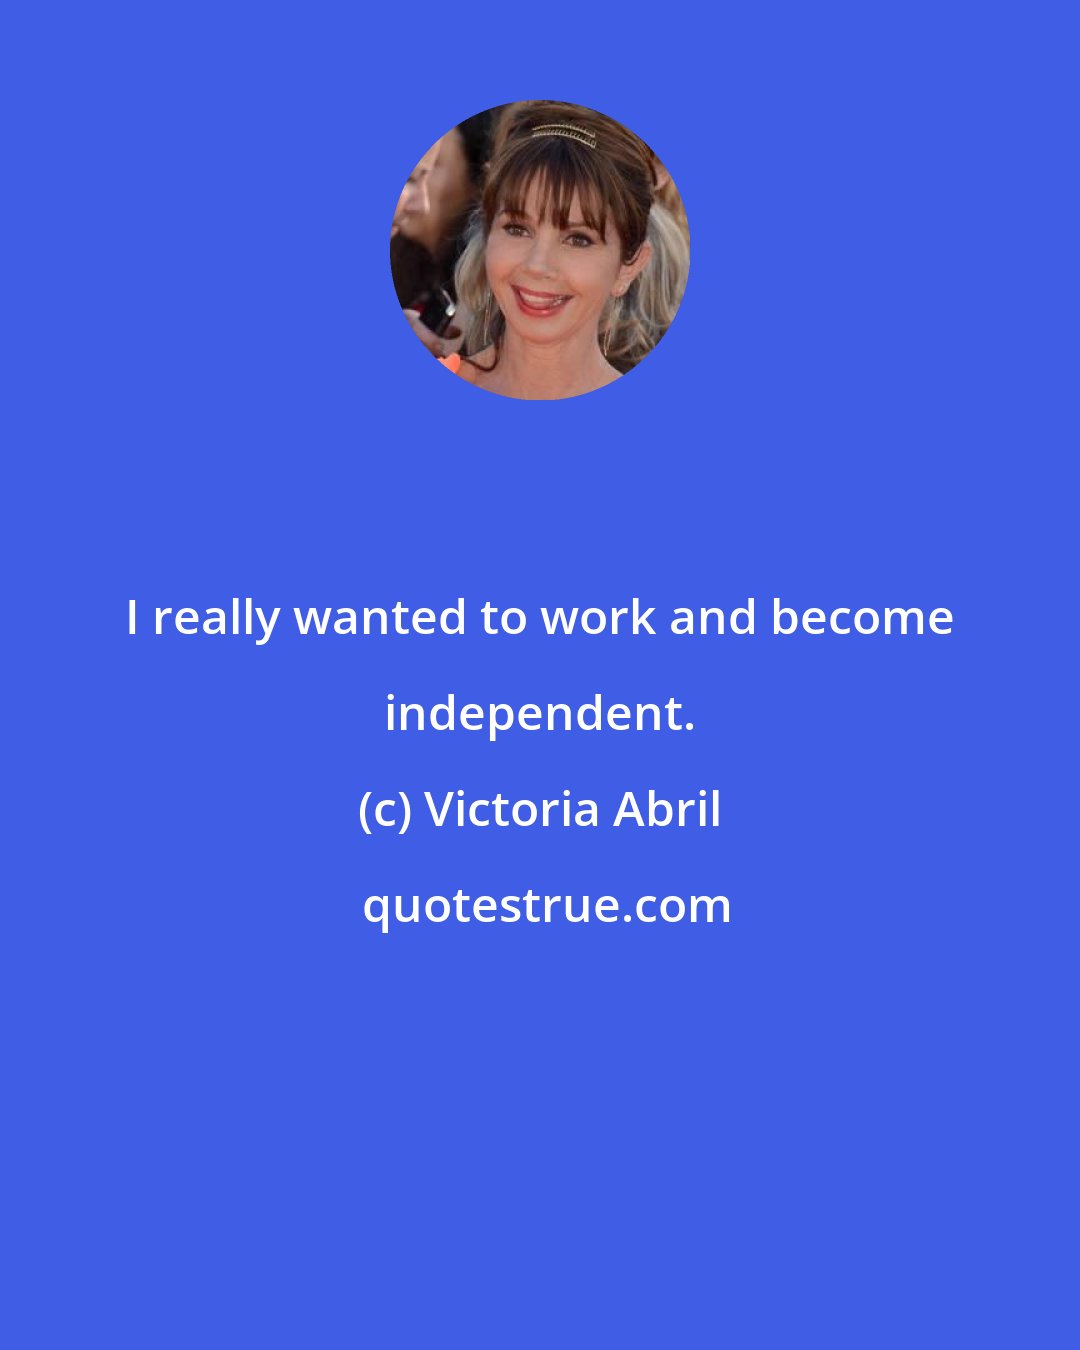 Victoria Abril: I really wanted to work and become independent.